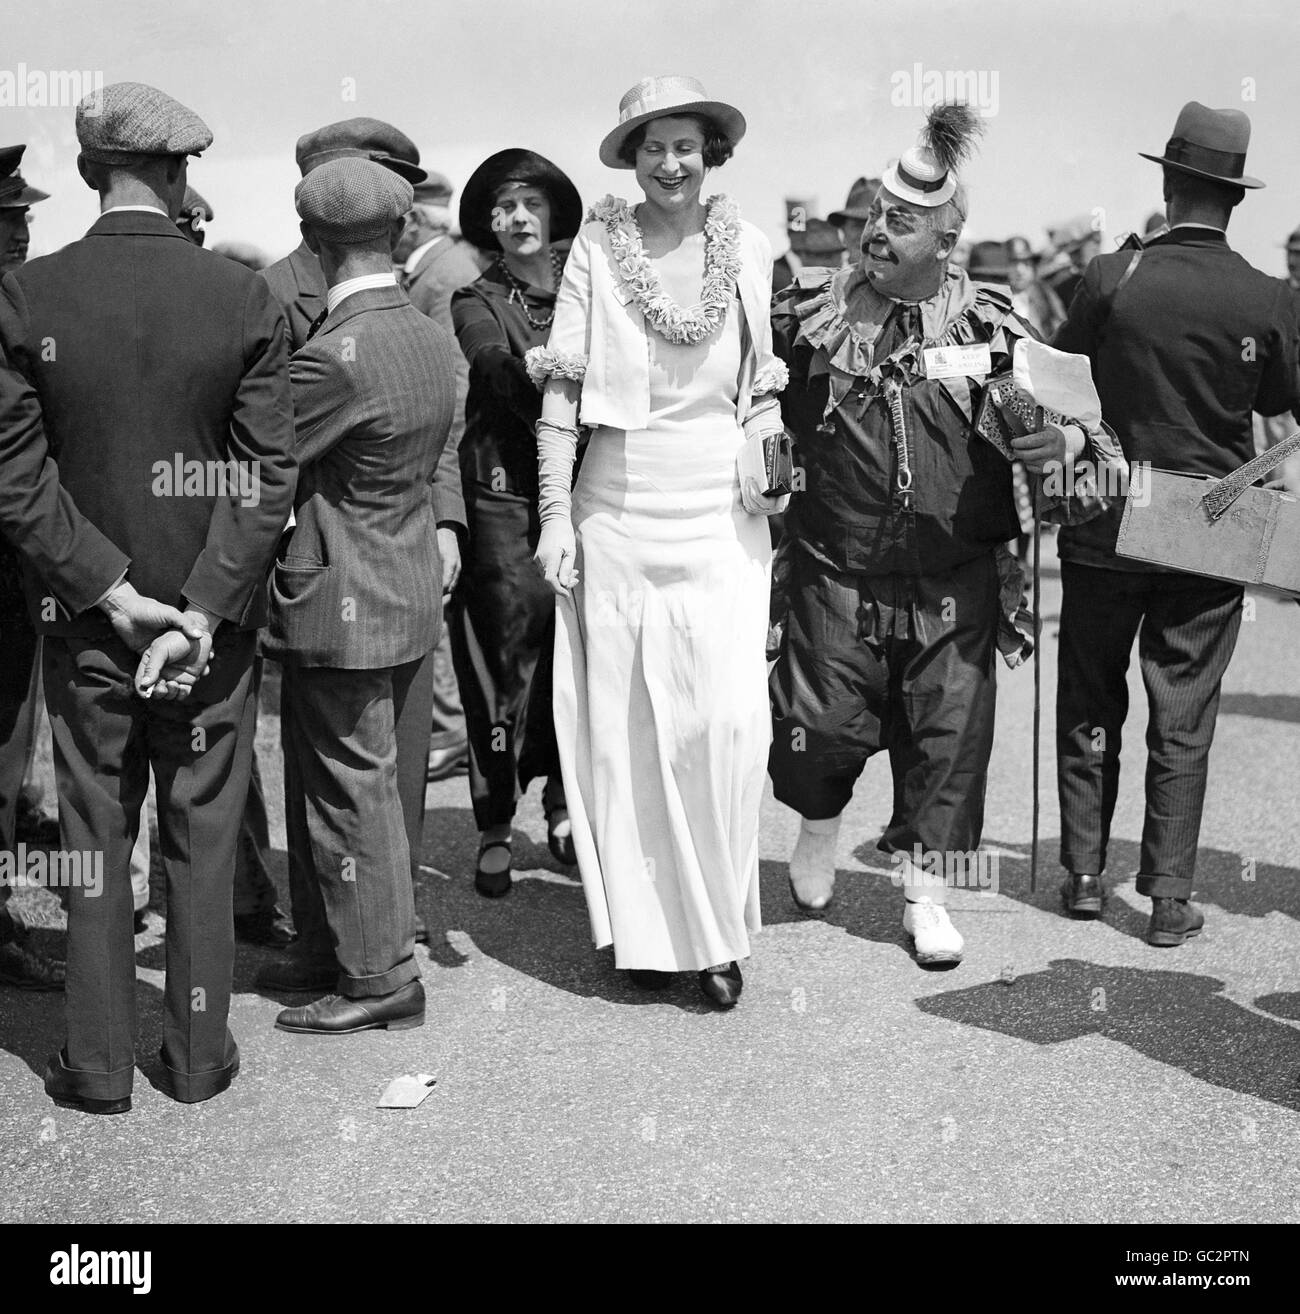 A well-dressed lady at the races at Royal Ascot shows her amusement as she is joined by a clown, in full costume, as she makes her way through the crowd. Stock Photo